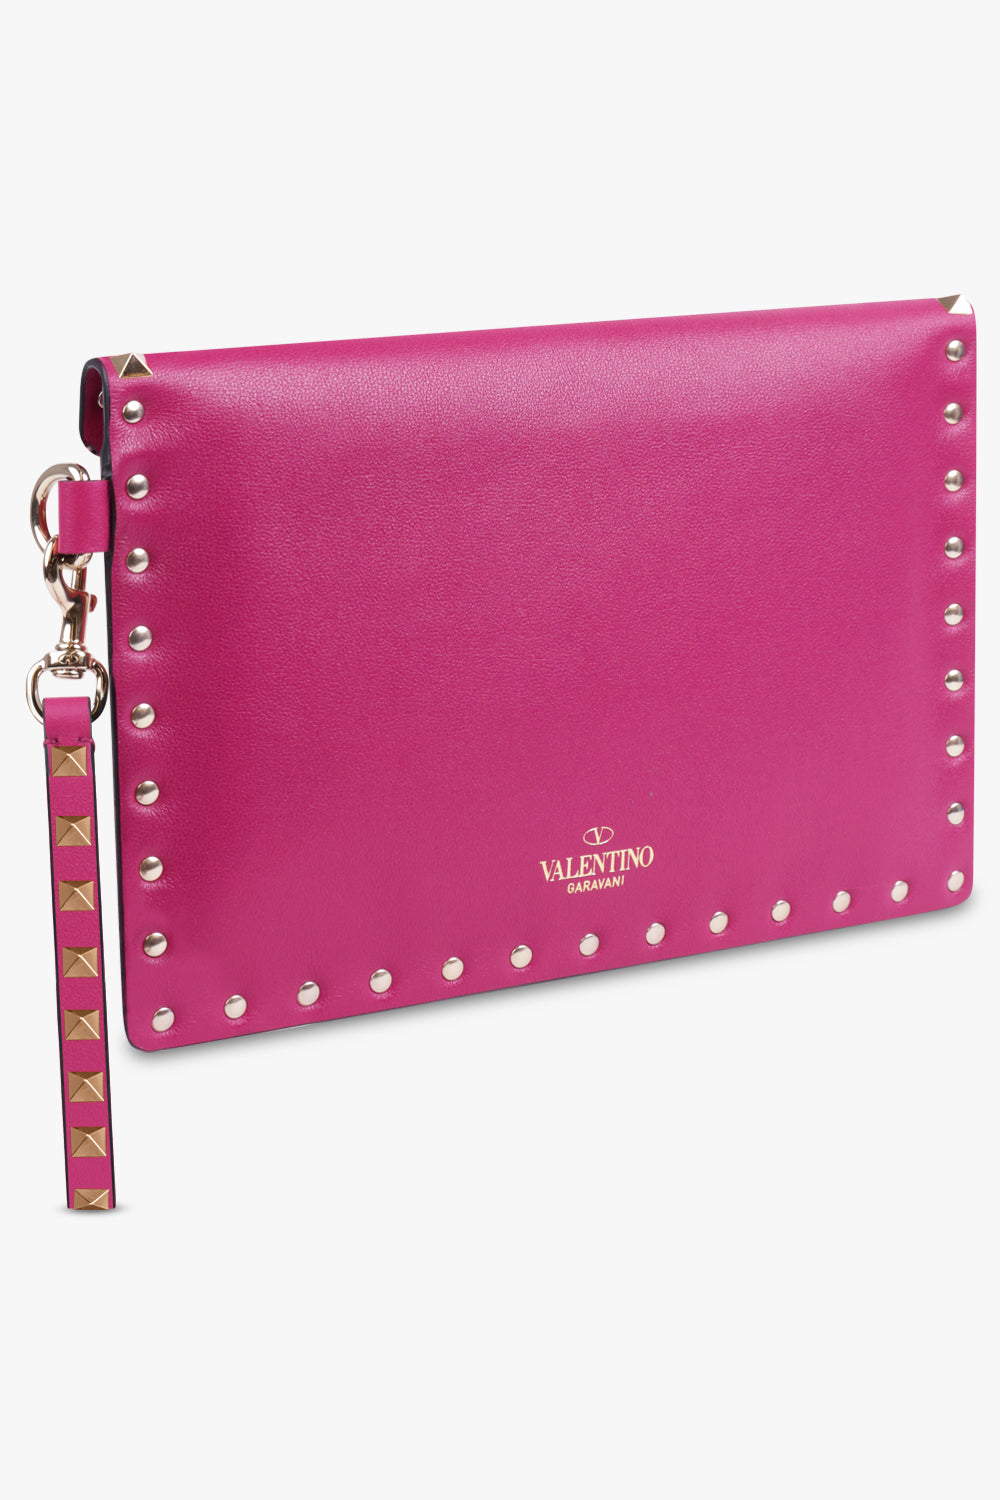 VALENTINO ROCKSTUD FLAT POUCH SMOOTH LEATHER WATER ROSE PARLOUR X – Parlour  X